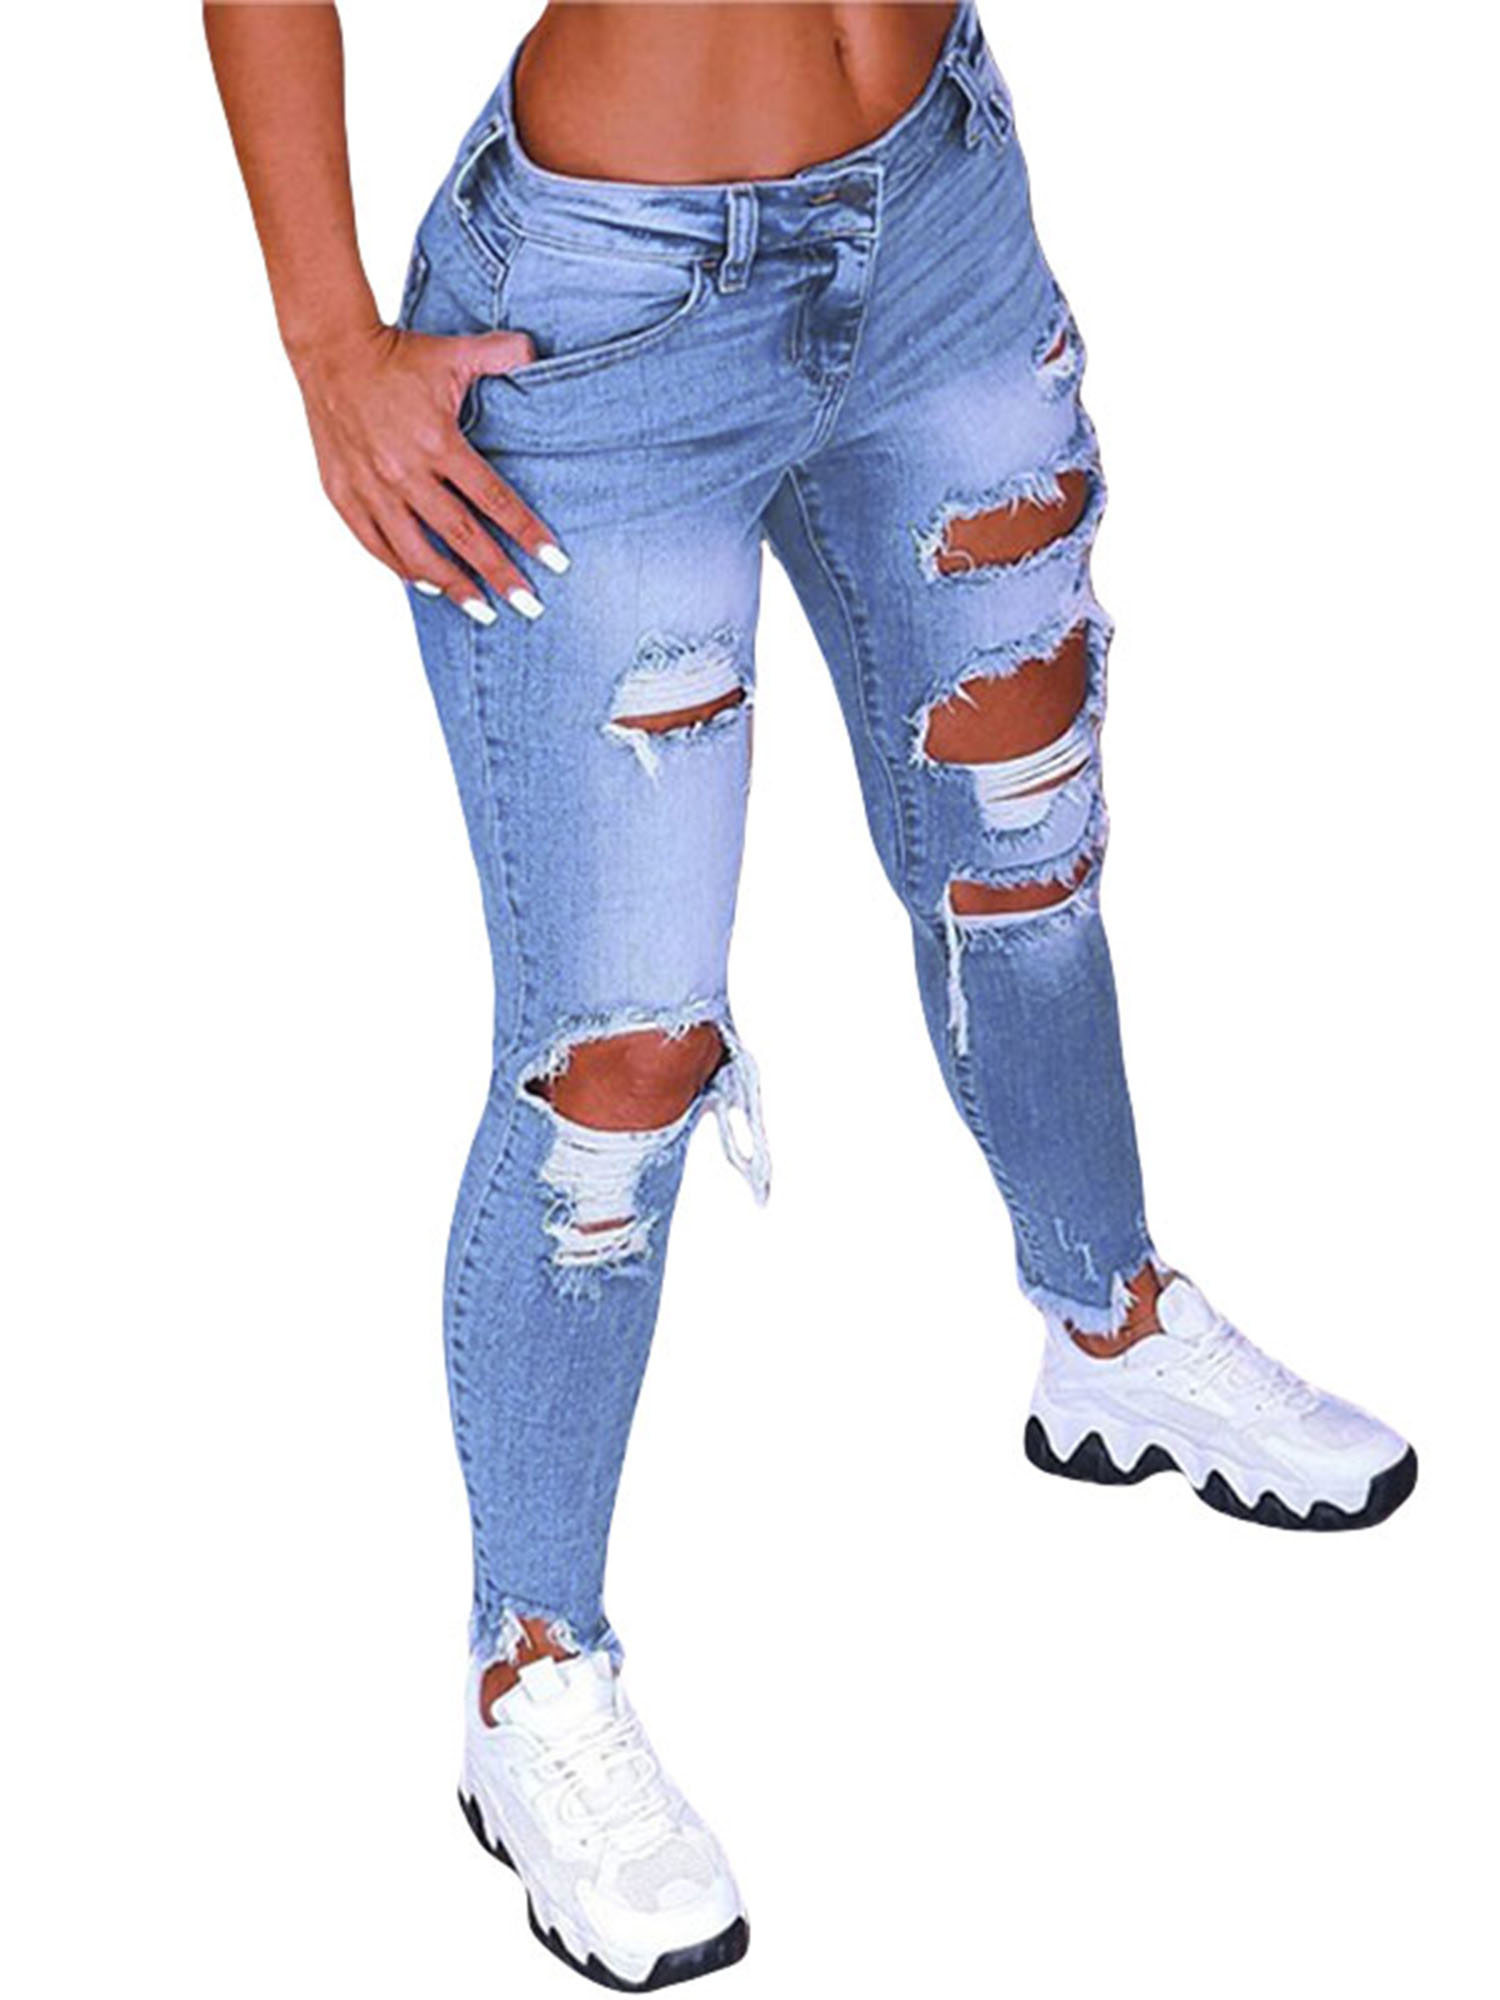 UKAP Women Stretch Ripped Skinny Butt Lift Jeans Casual Distressed Denim Pants - image 1 of 2